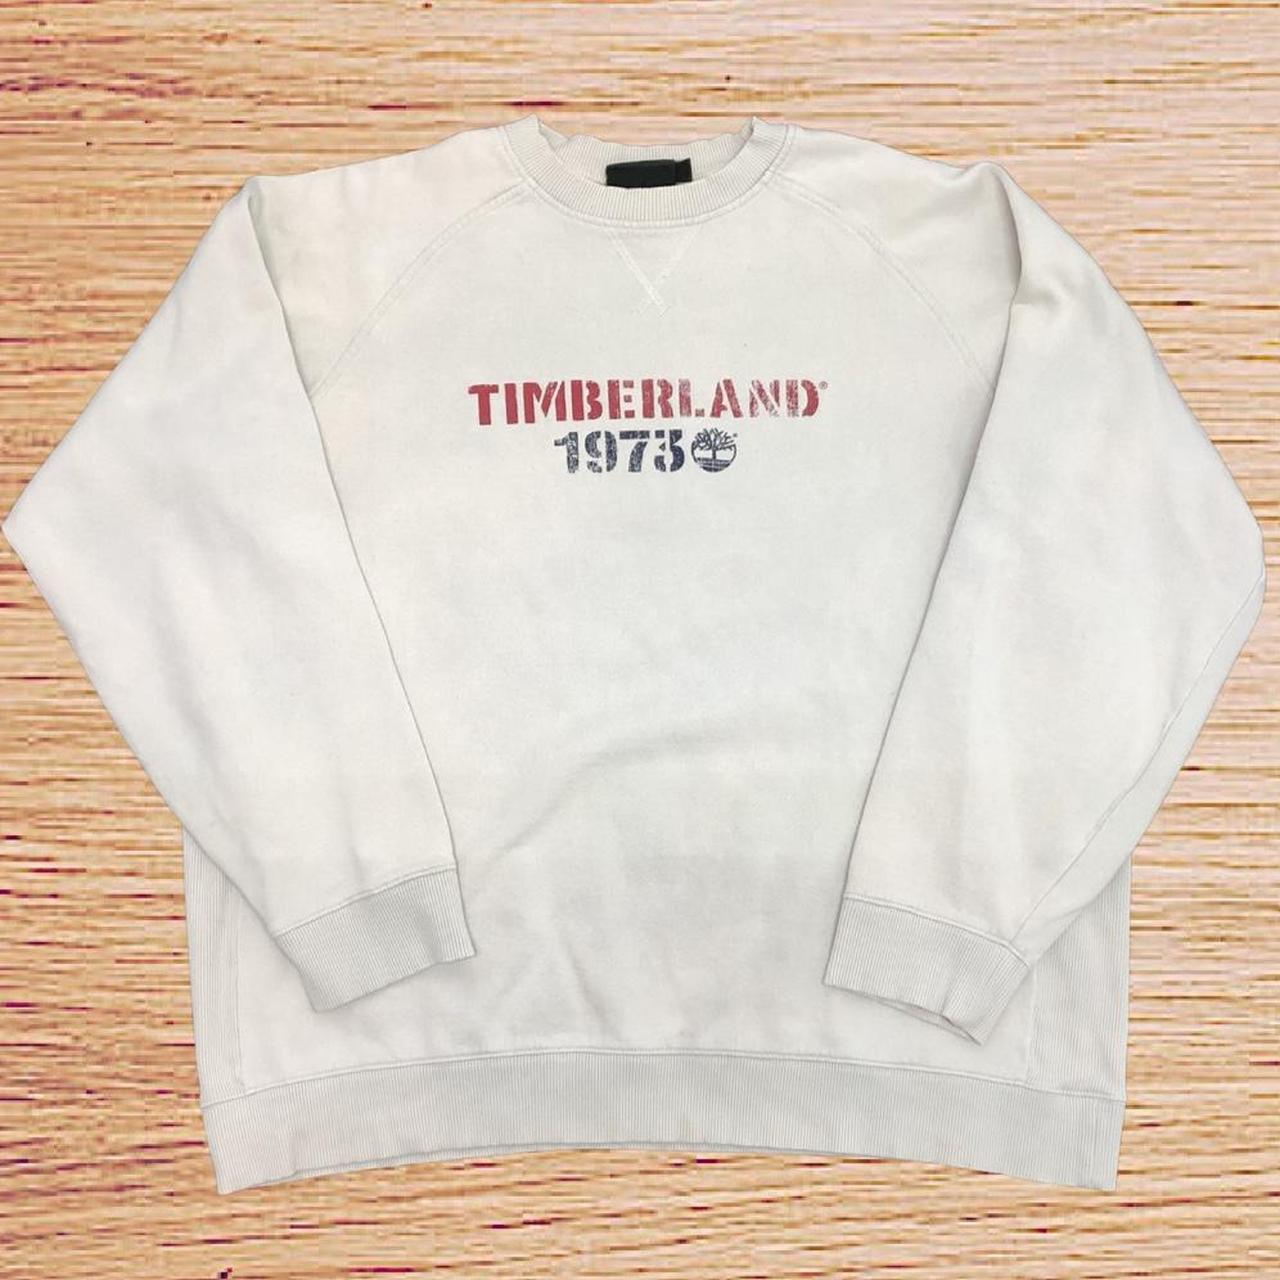 Product Image 2 - Timberland crewneck!

Measurements:
Length- 29”
Width (Pit to